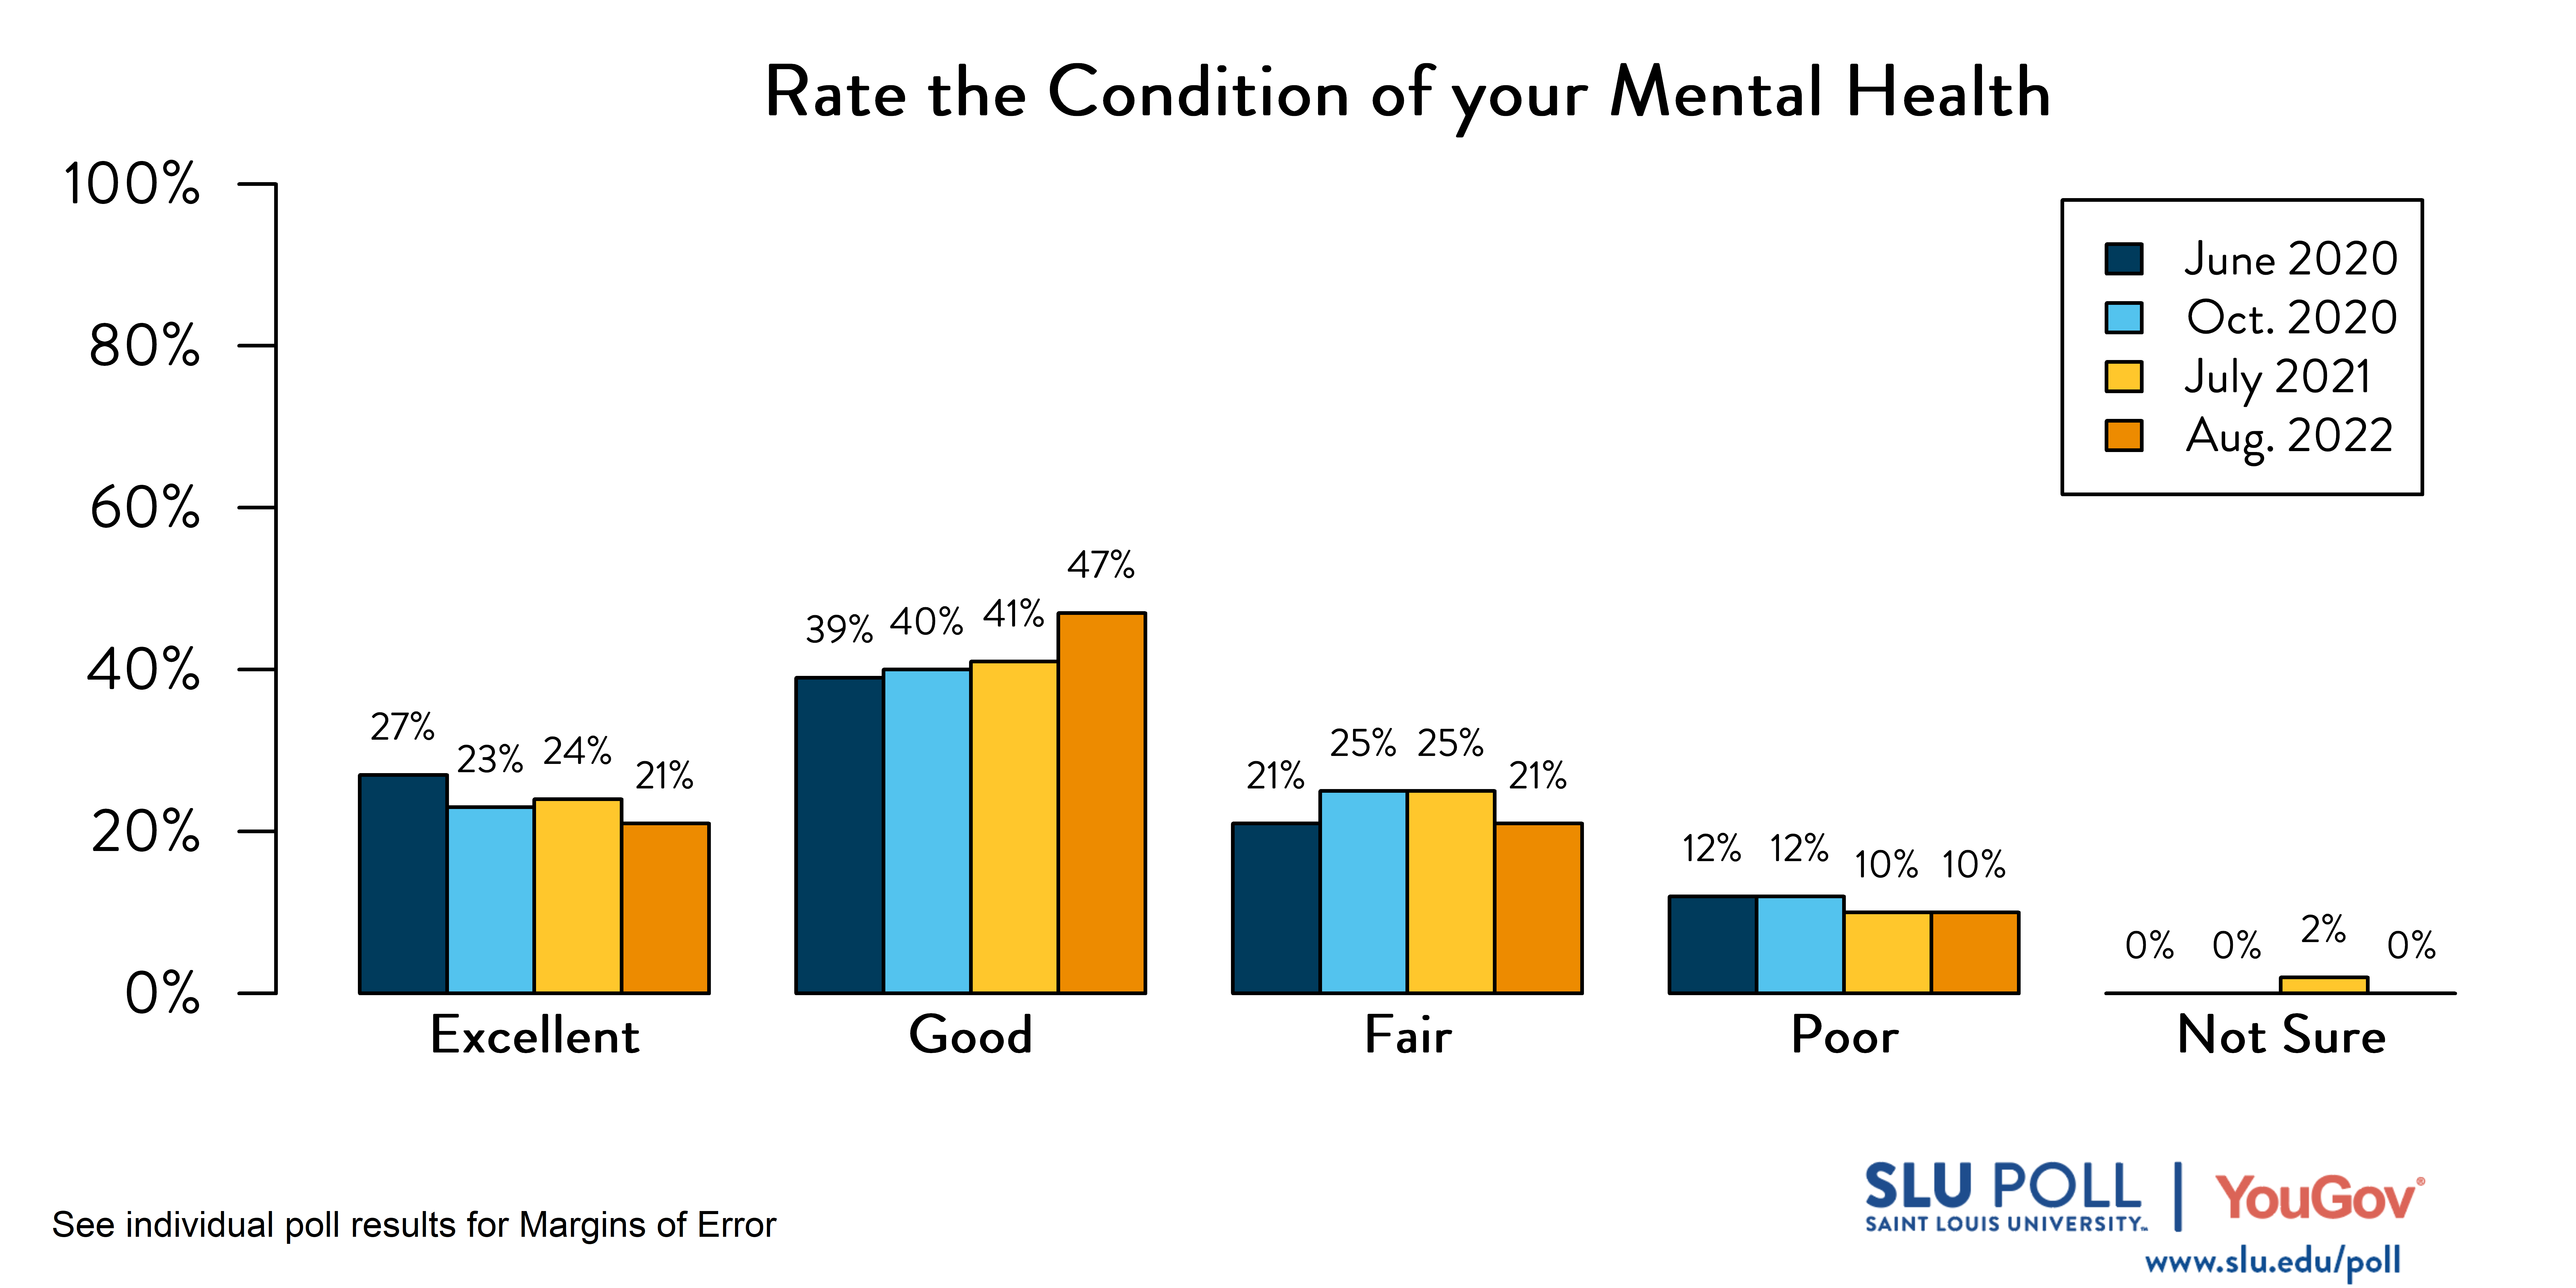 Likely voters' responses to 'How would you rate the following: Your mental health in the last month?'. June 2020 Voter Responses 27% Excellent, 39% Good, 21% Fair, 12% Poor, and 0% Not sure. October 2020 Voter Responses: 23% Excellent, 40% Good, 25% Fair, 12% Poor, and 0% Not sure. July 2021 Voter Responses: 24% Excellent, 41% Good, 25% Fair, 10% Poor, and 2% Not sure. August 2021 Voter Responses: 21% Excellent, 47% Good, 21% Fair, 10% Poor, and 0% Not sure.